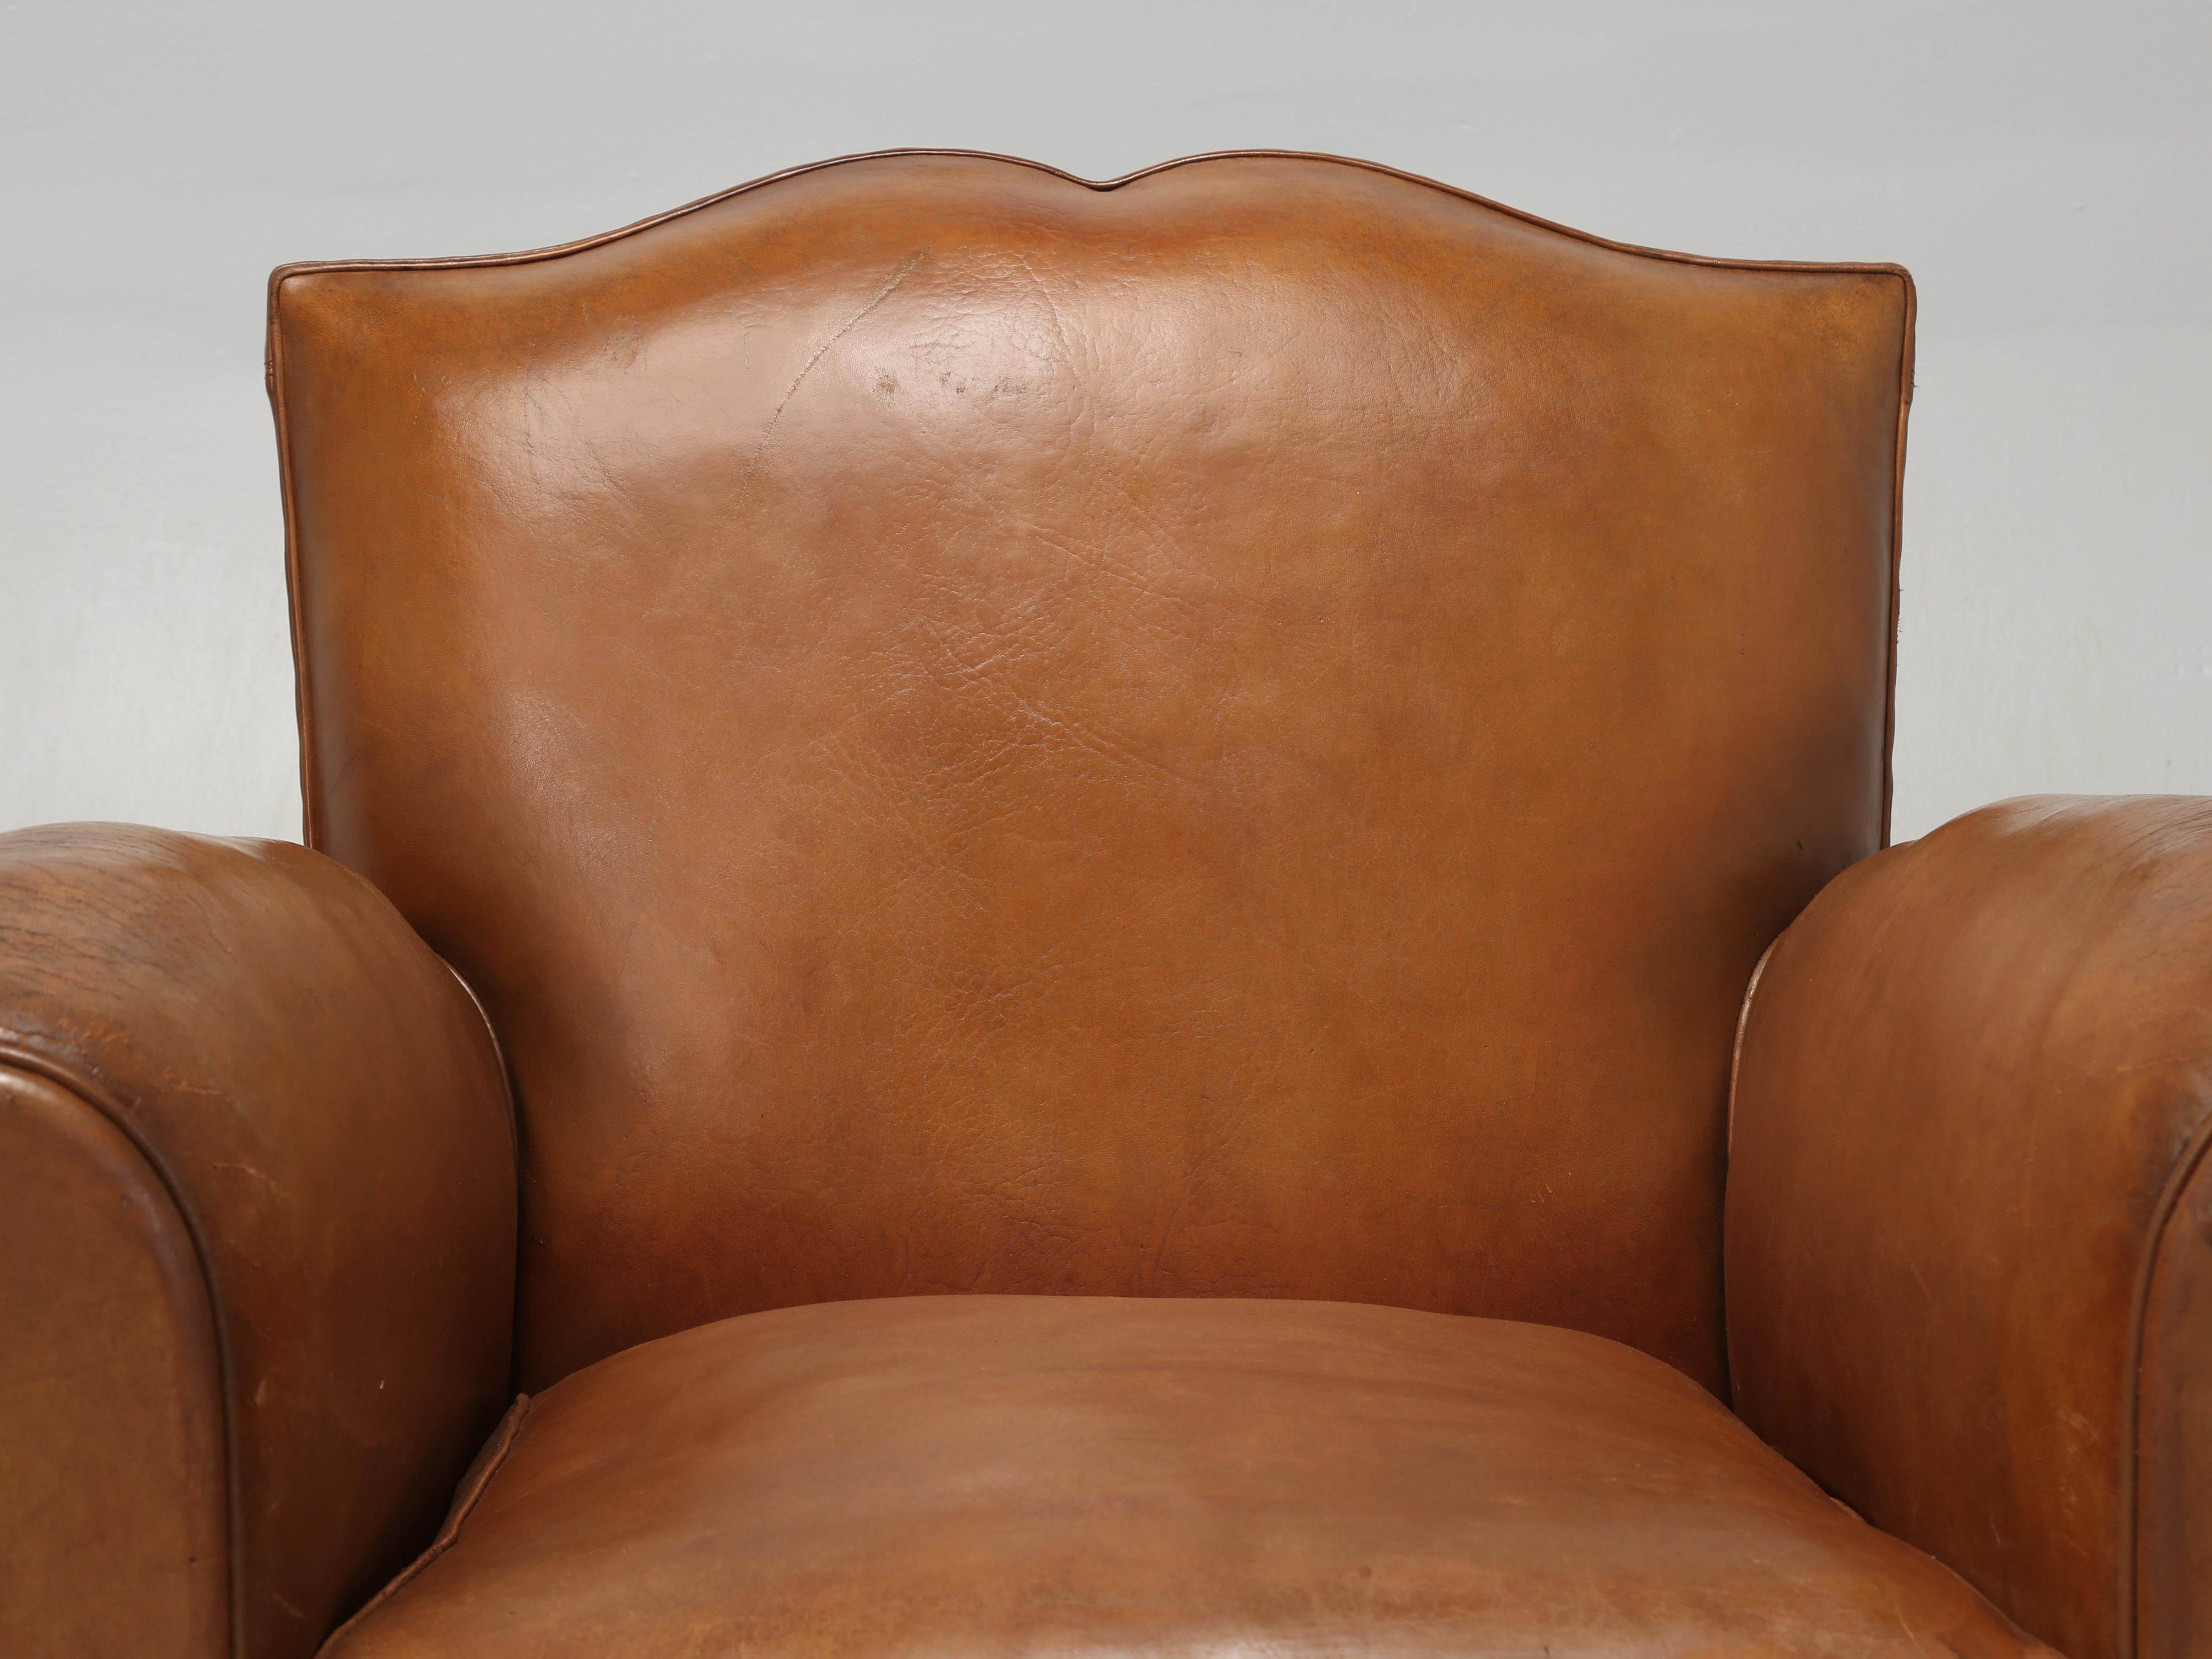 Hand-Crafted French Art Deco Moustache Original Leather Club Chairs Restored Inside, c1930s 